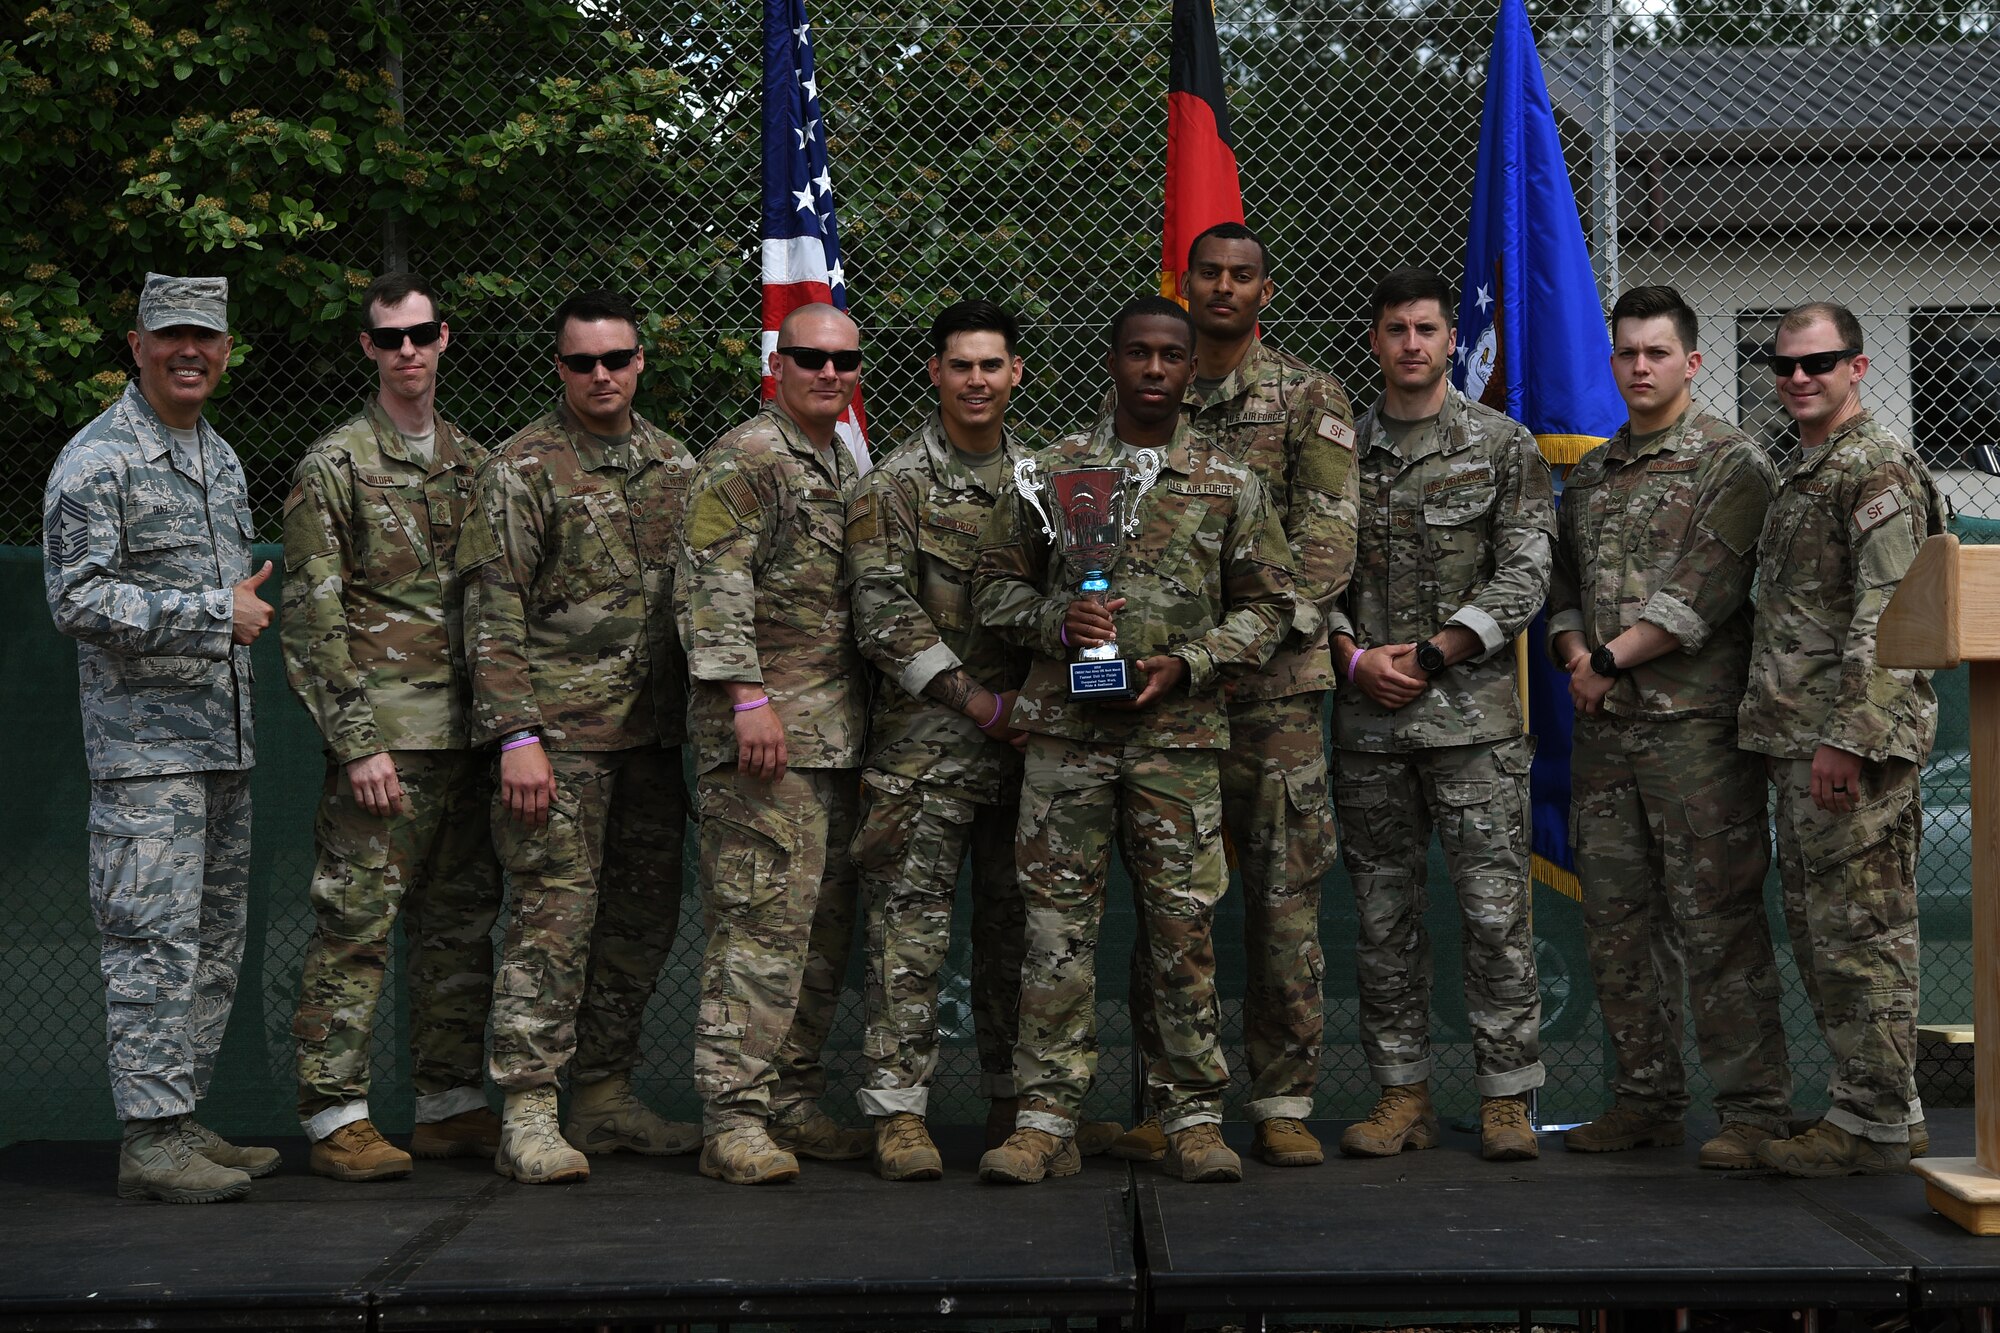 Members of the 435th Security Forces Squadron pose for a photo with Chief Master Sgt. Heriberto Diaz, 521st Air Mobility Operations Wing command chief, right, during the Fourth Annual Chief Master Sgt. of the Air Force Paul Airey Memorial Ruck on Ramstein Air Base, Germany, May 31, 2019.